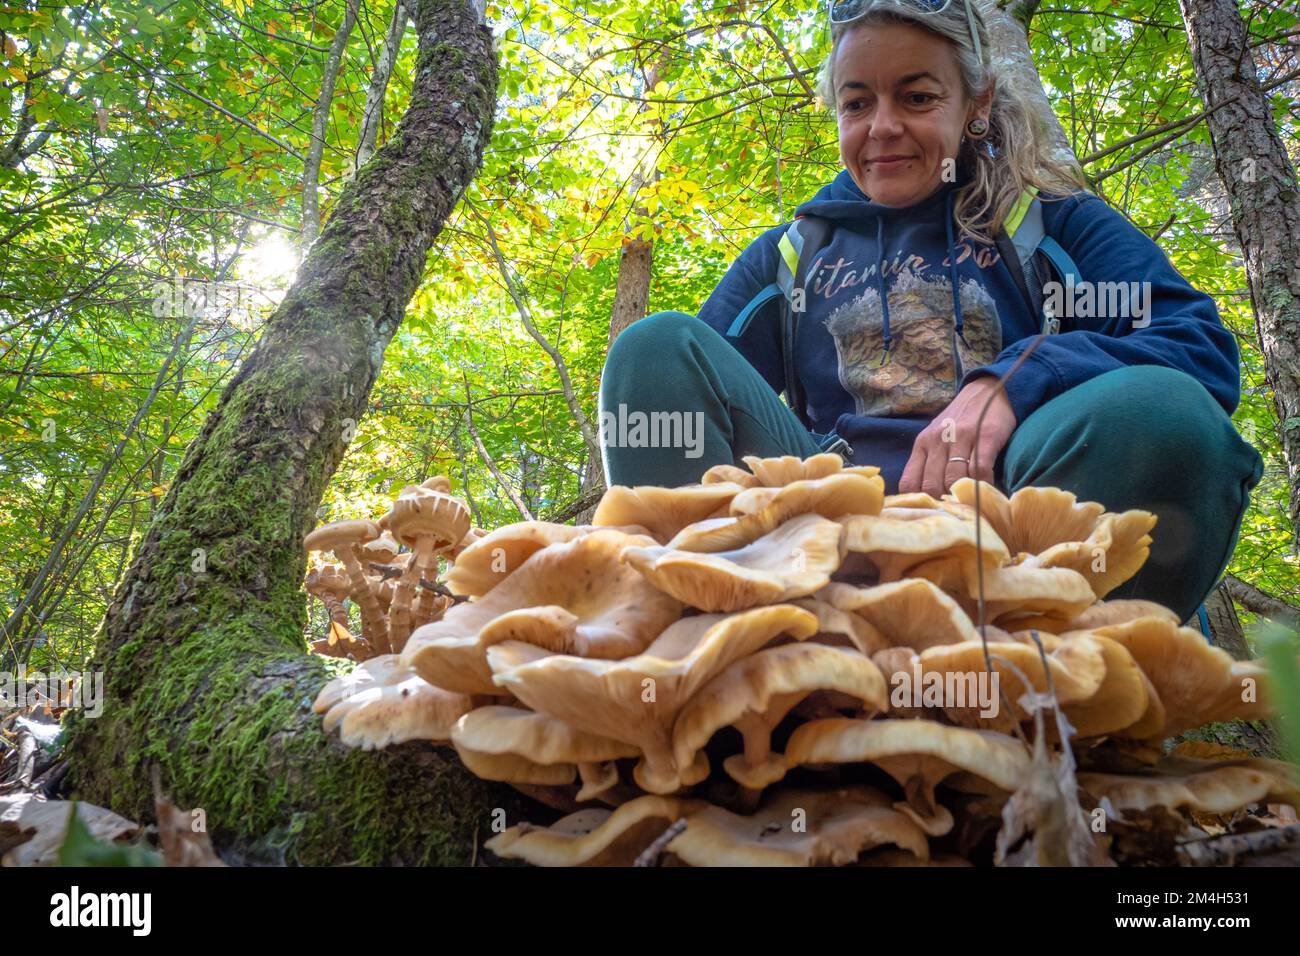 Mushroom forager trying to identify wild mushrooms in the forest with identification book - Mushroom picking and mushroom foraging Stock Photo